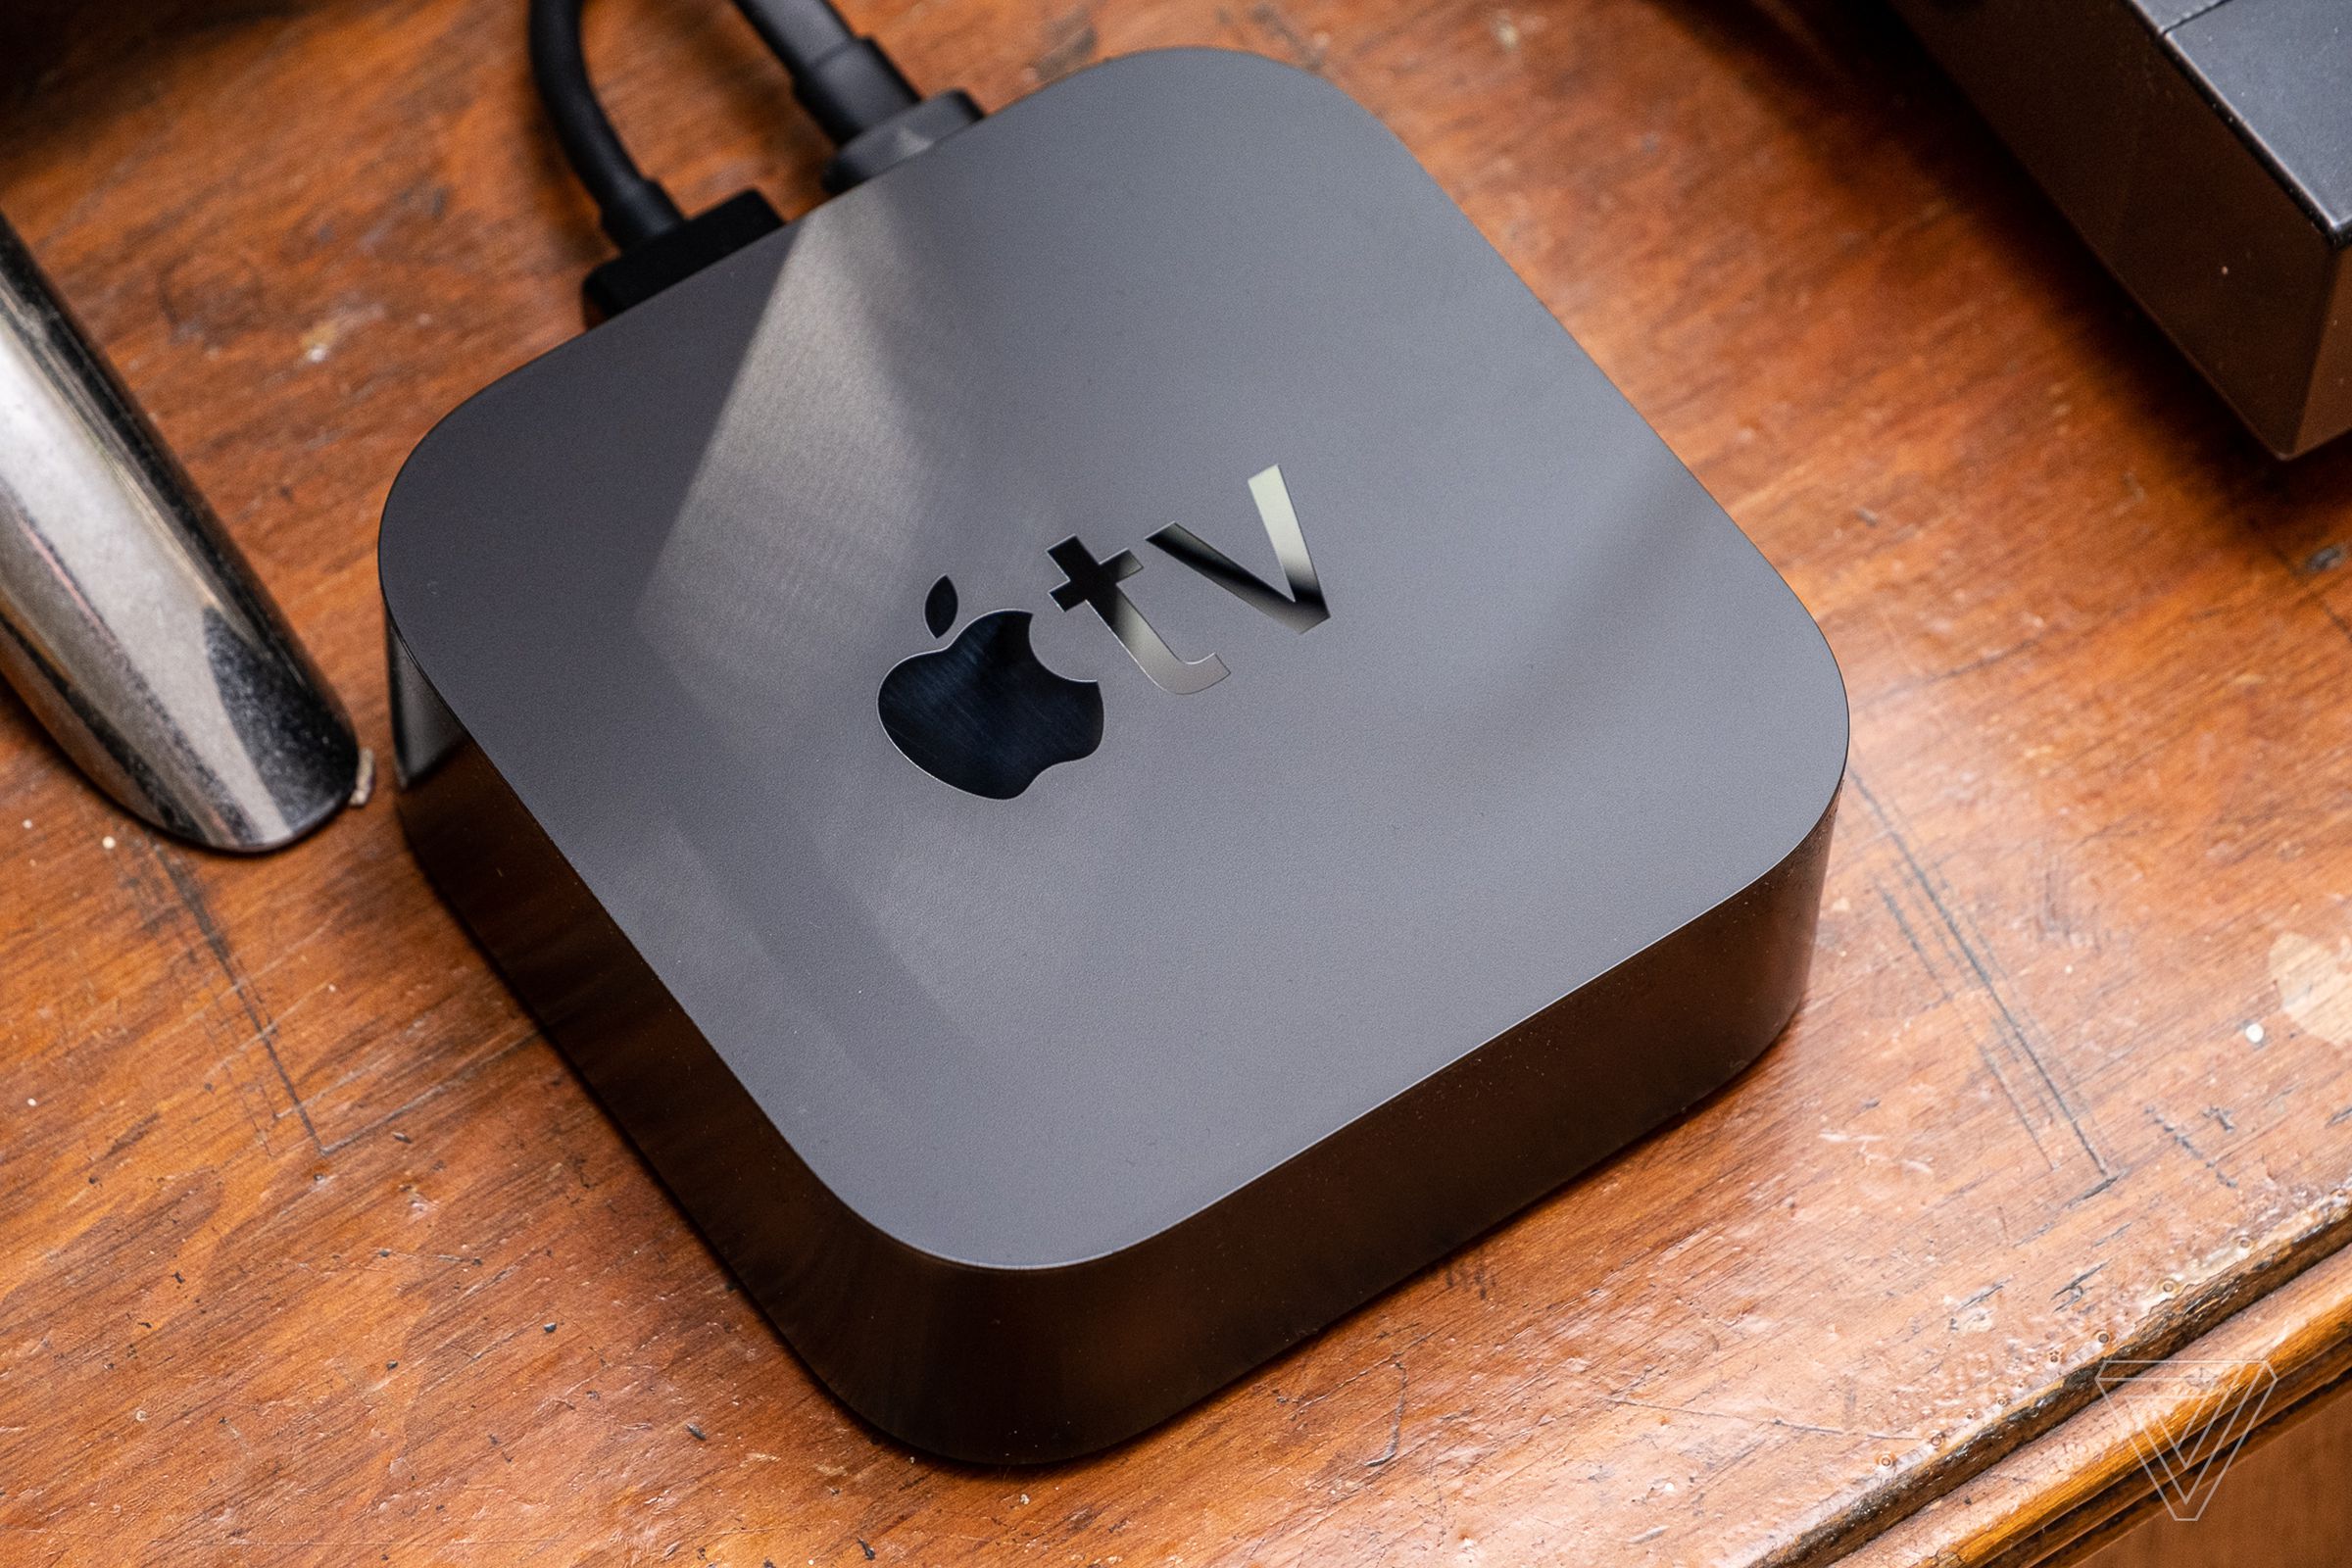 A photo of the Apple TV 4K set on top of a brown wooden surface.